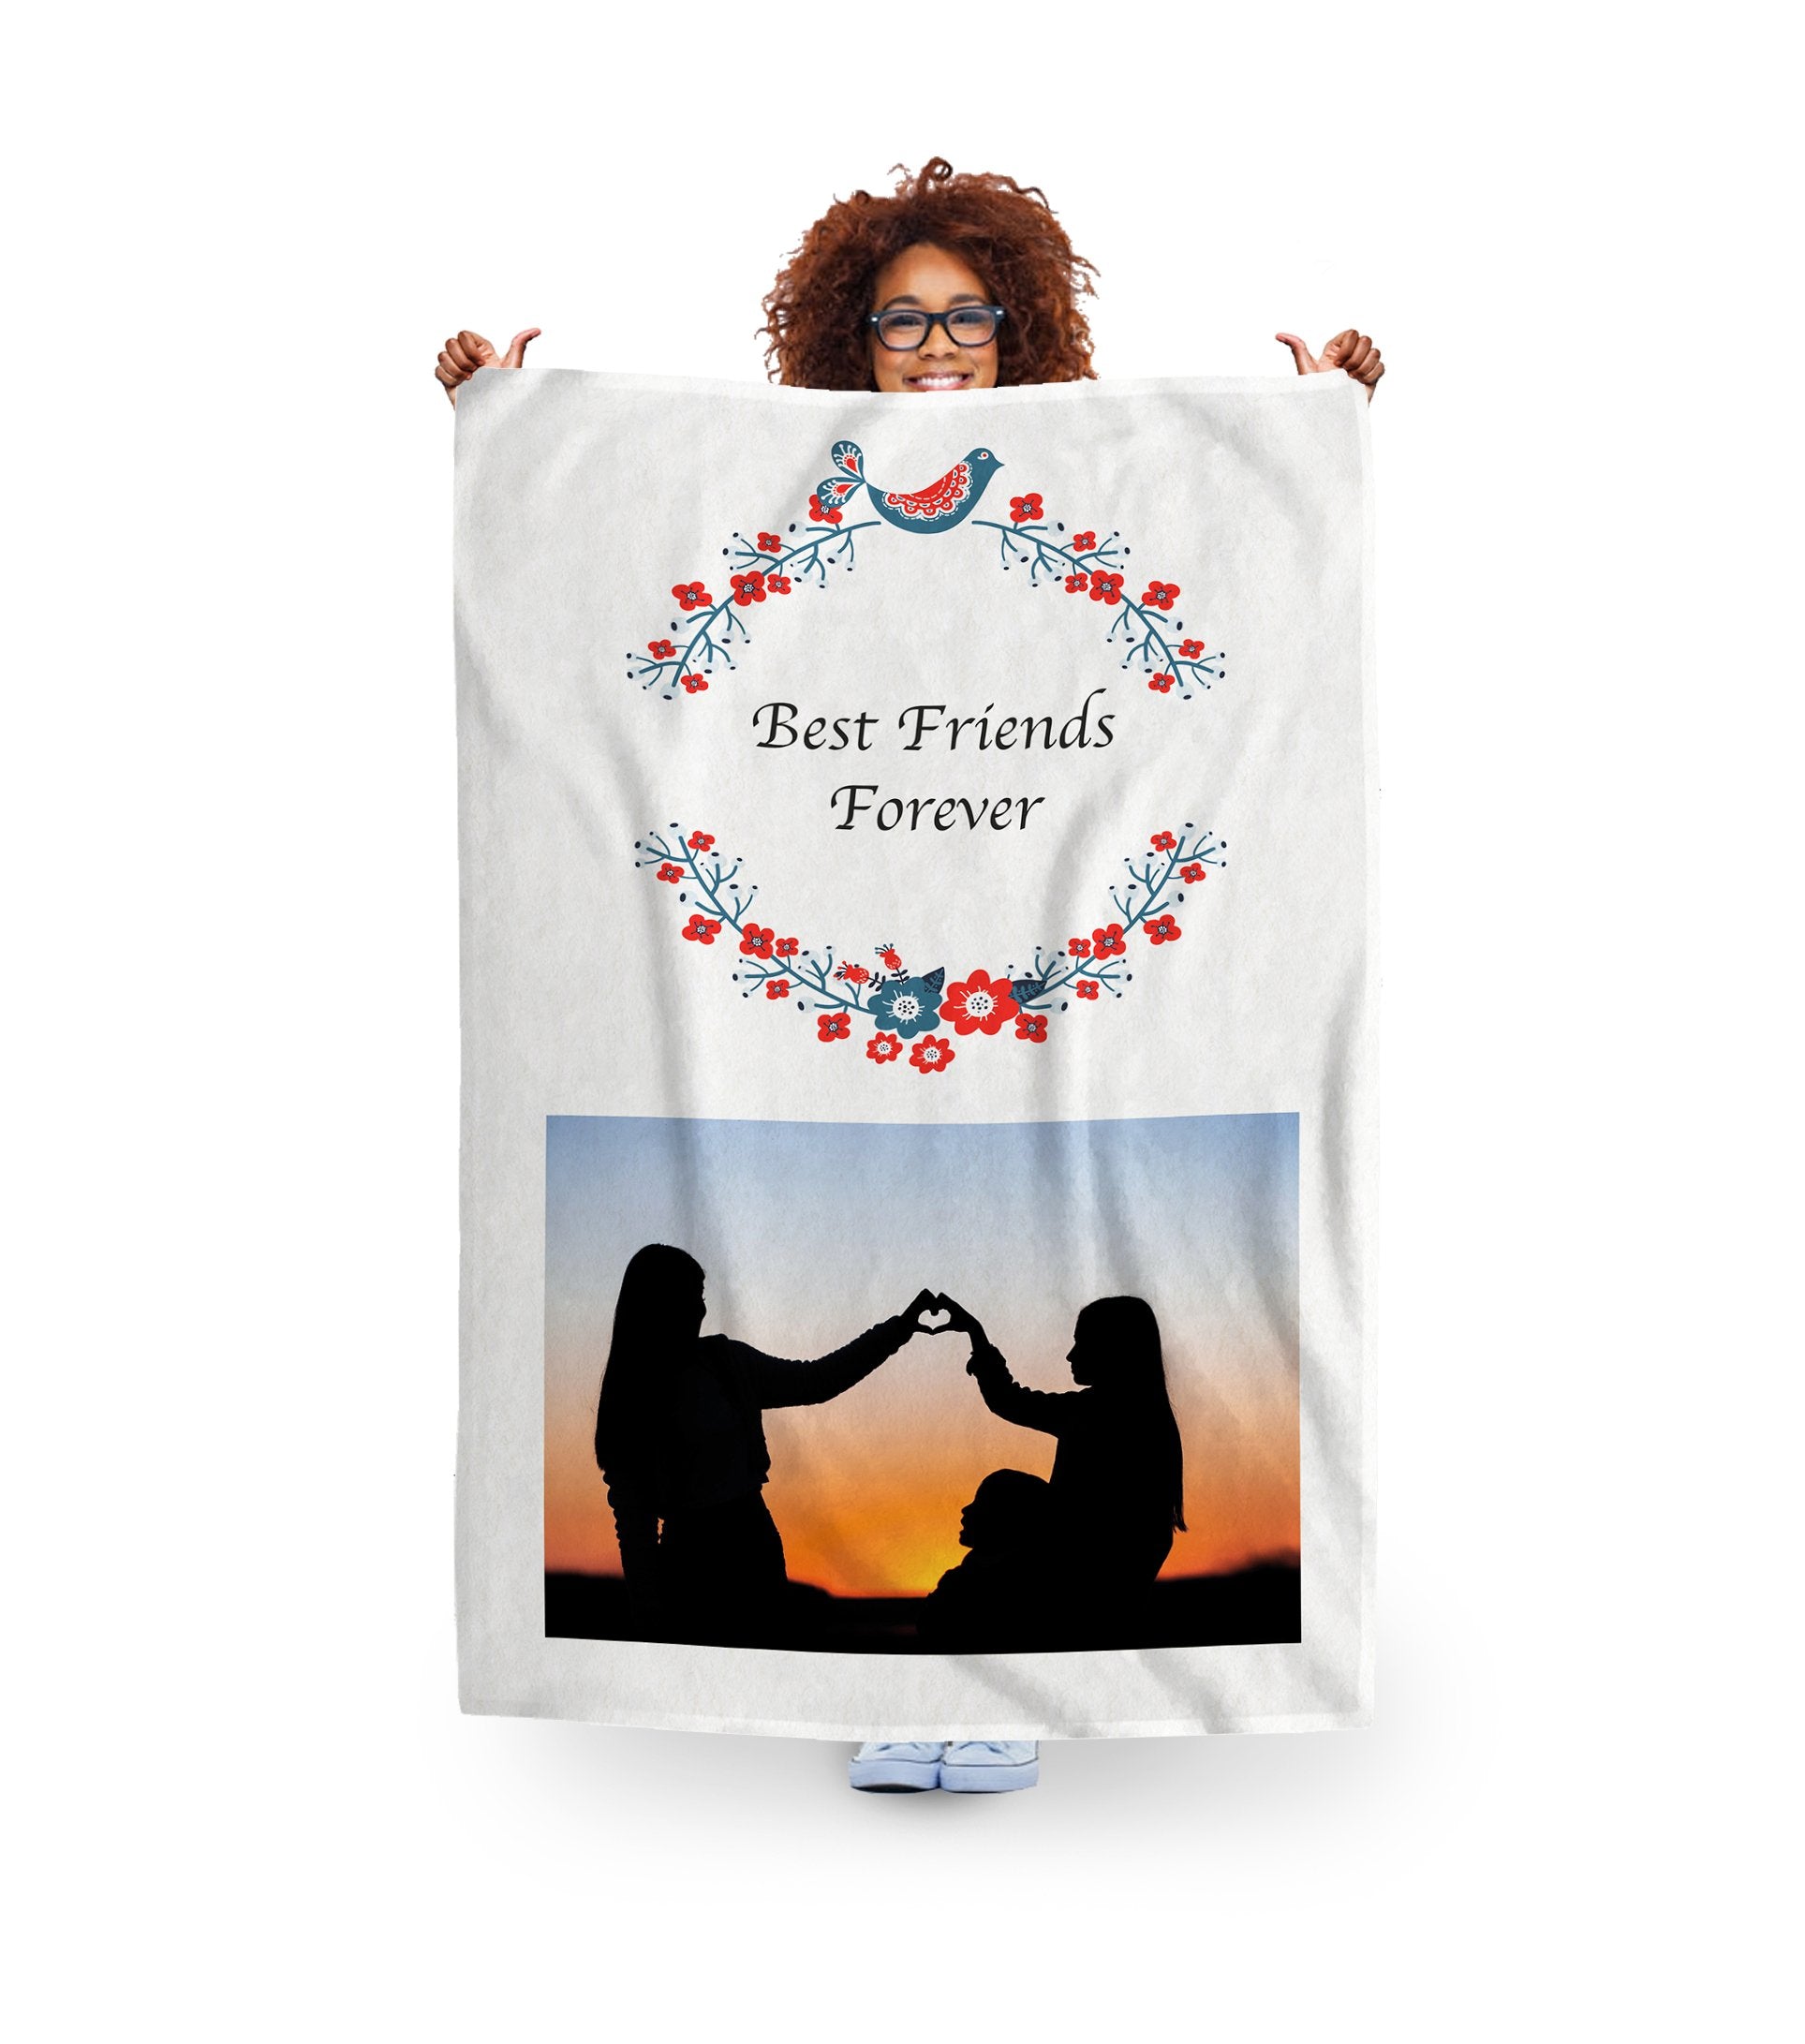 women holding fleece blanket with personalised text and photo. flower pattern and couple photo on blanket. King size blanket